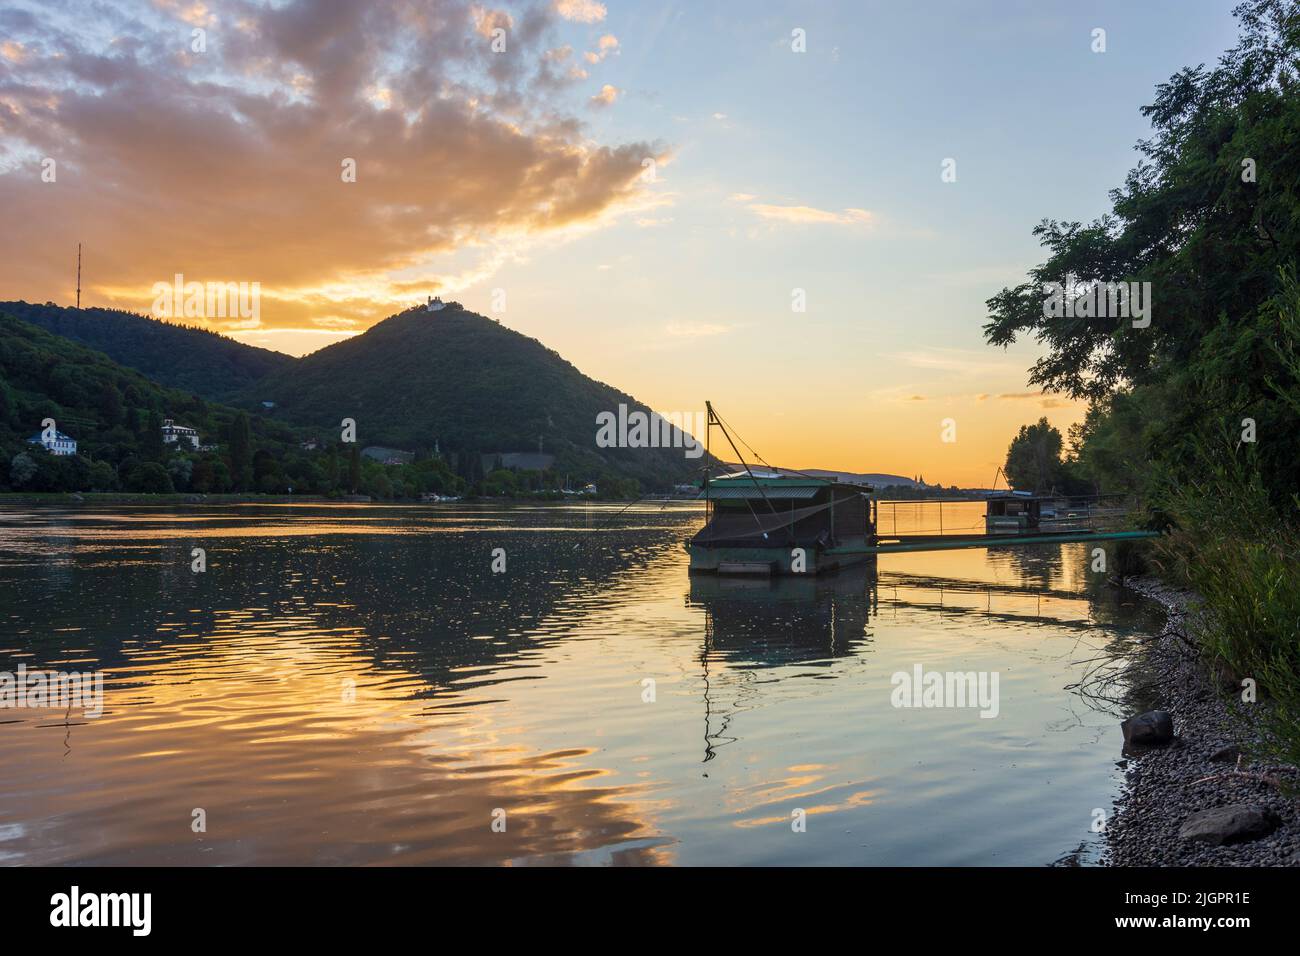 Wien, Vienna: sunset at river Donau (Danube), view to mountain Kahlenberg (left) and Leopoldsberg (with church), Daubel boat with lifting fishing net Stock Photo